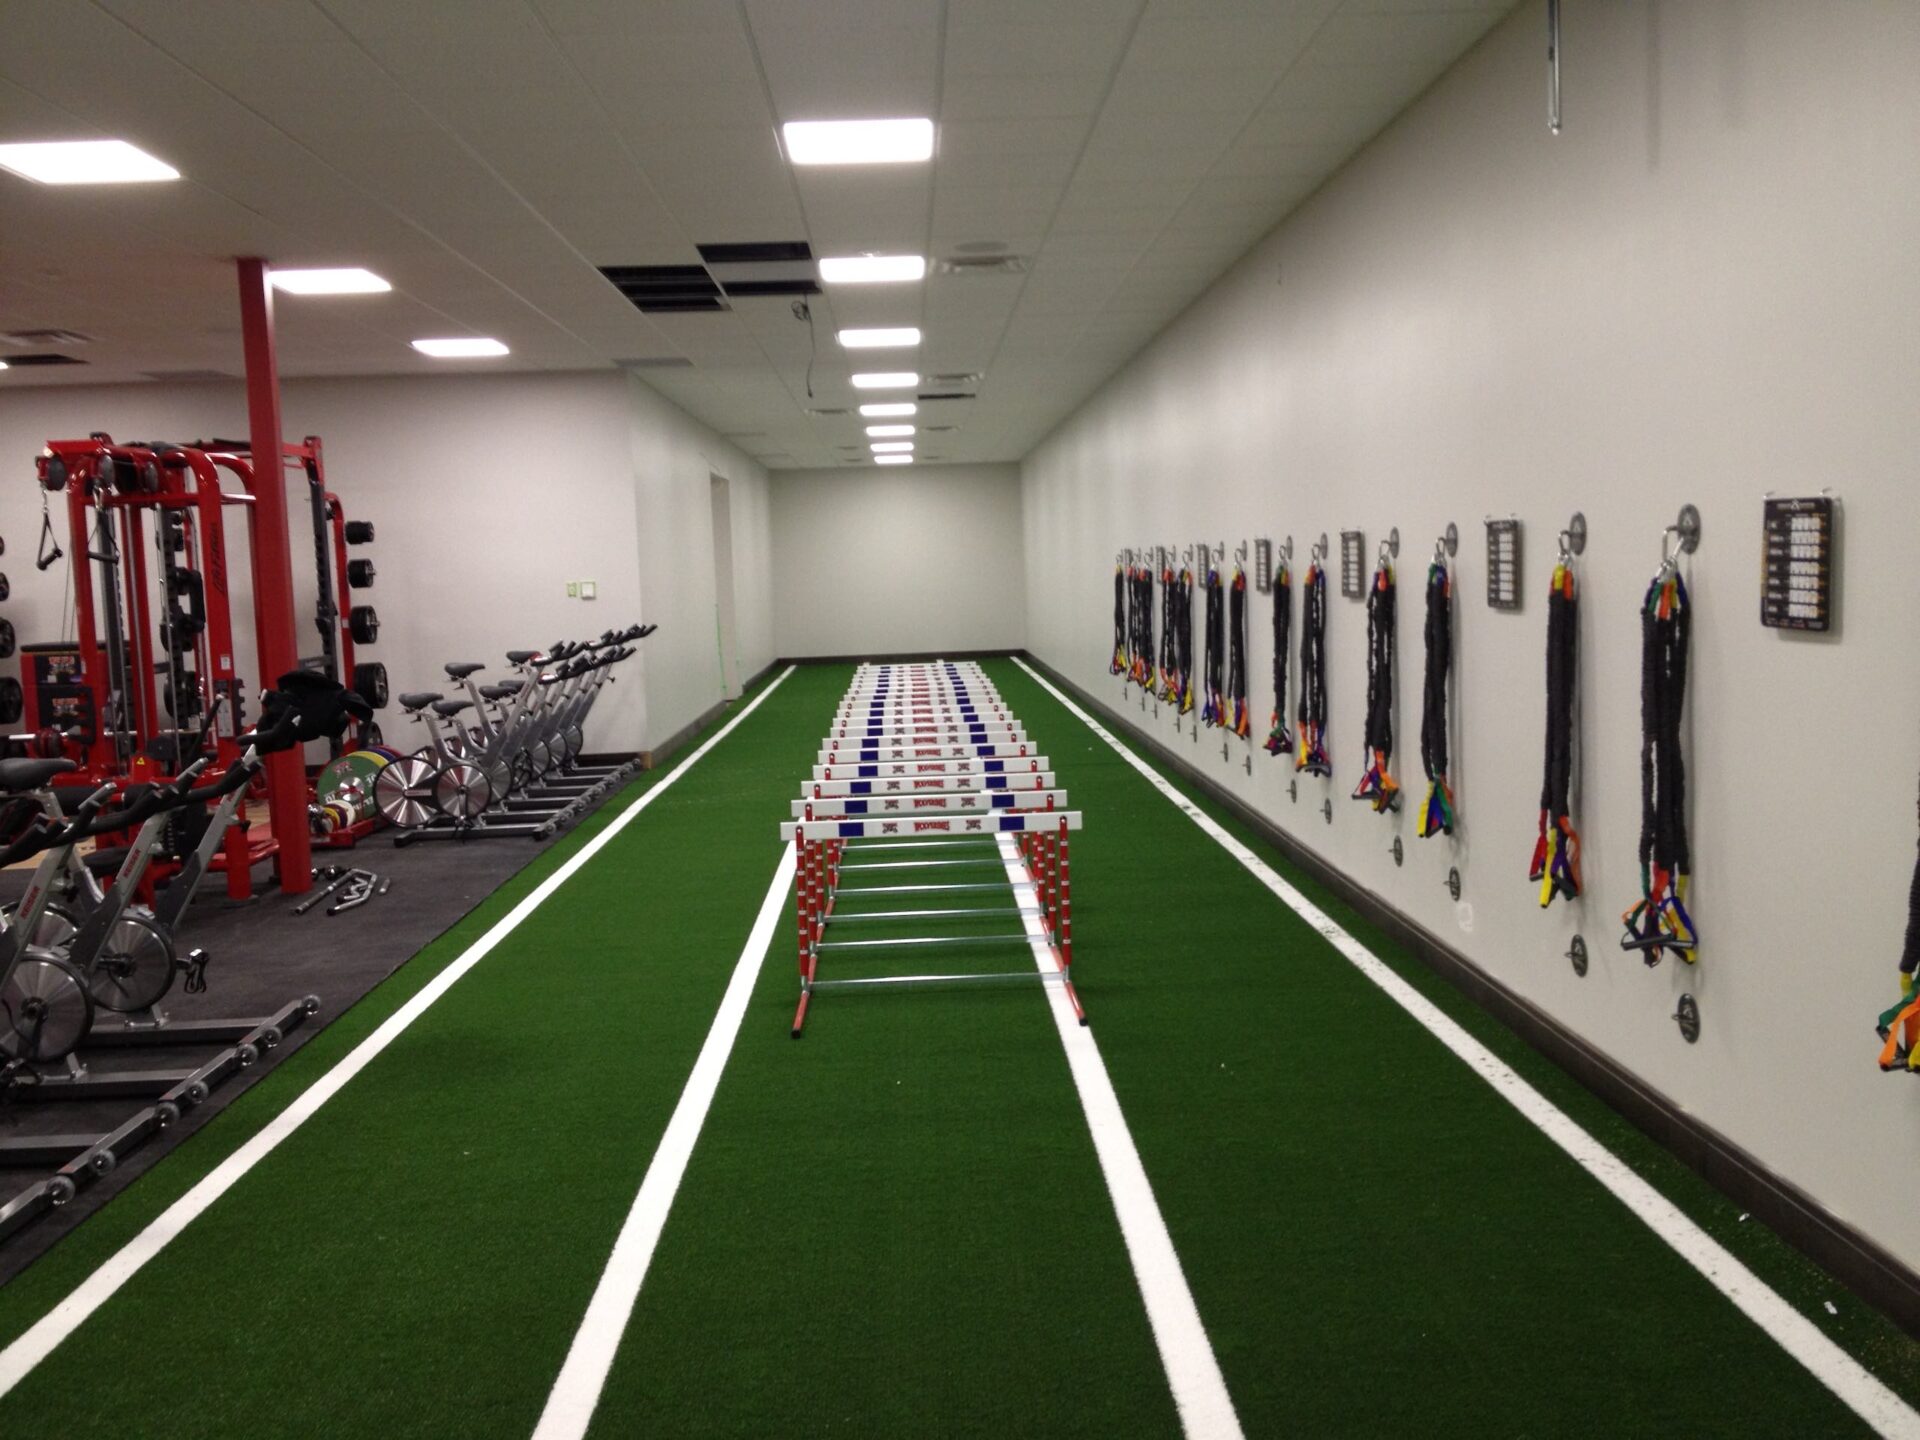 An indoor gym with a synthetic turf track, strength-training equipment, stationary bikes, resistance bands, and an agility ladder. The facility appears clean and organized.